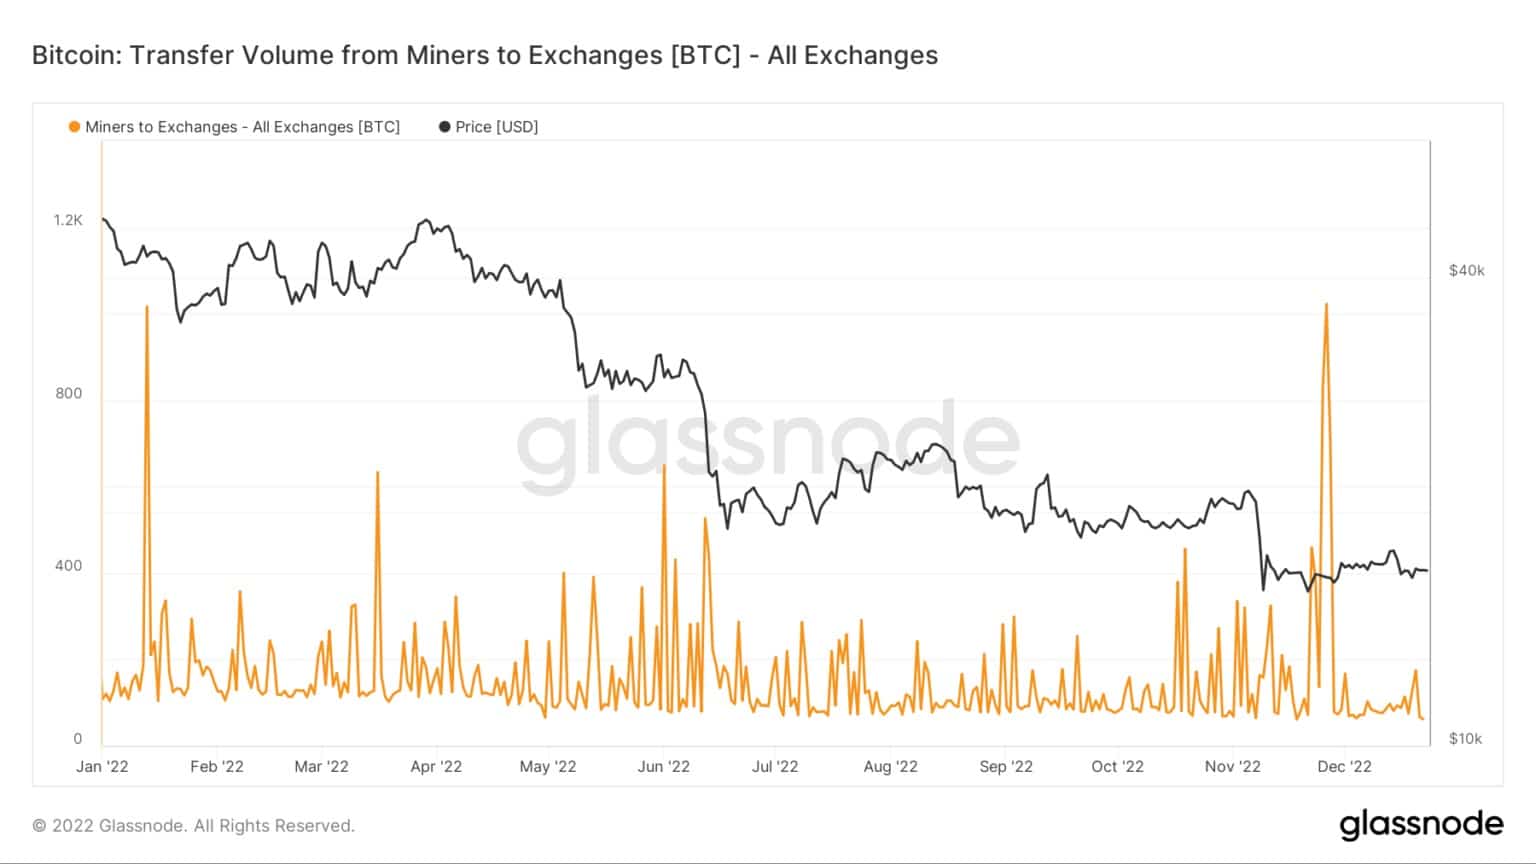 Bitcoin: Transfer Volume from Miners to Exchanges / Quelle: Glassnode